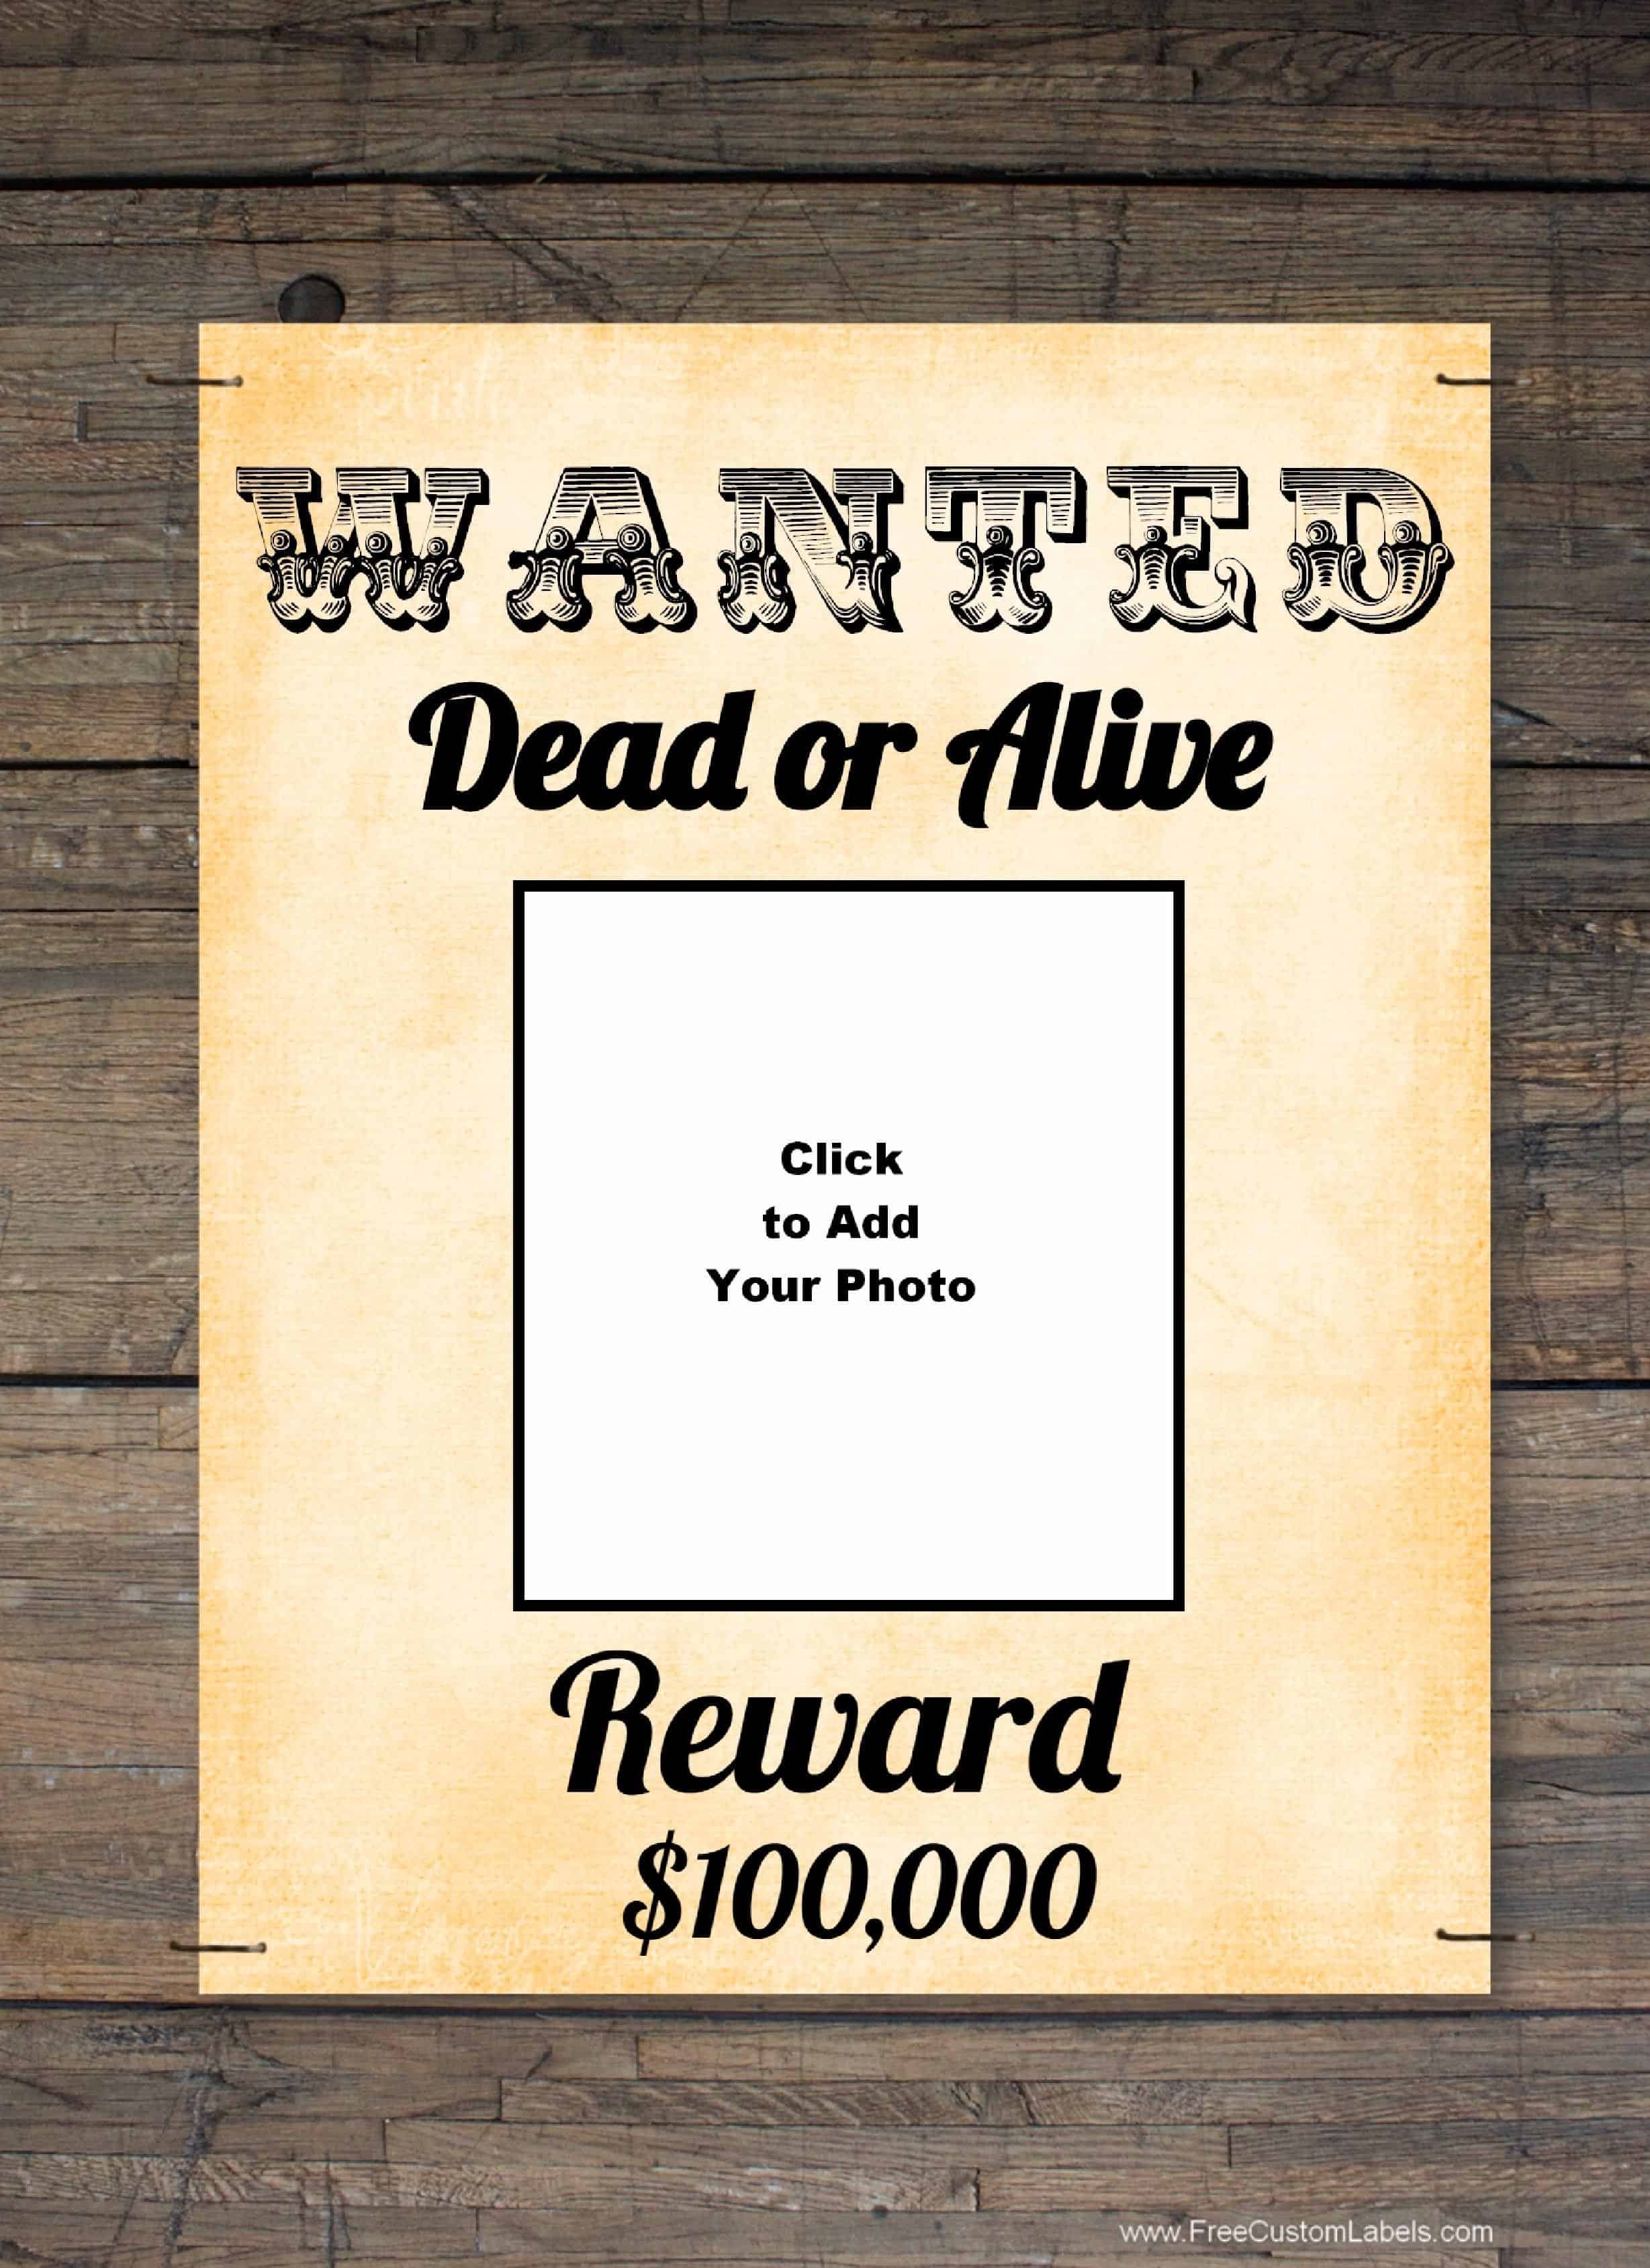 Free Wanted Poster Maker | Make a Free Printable Wanted Poster Online